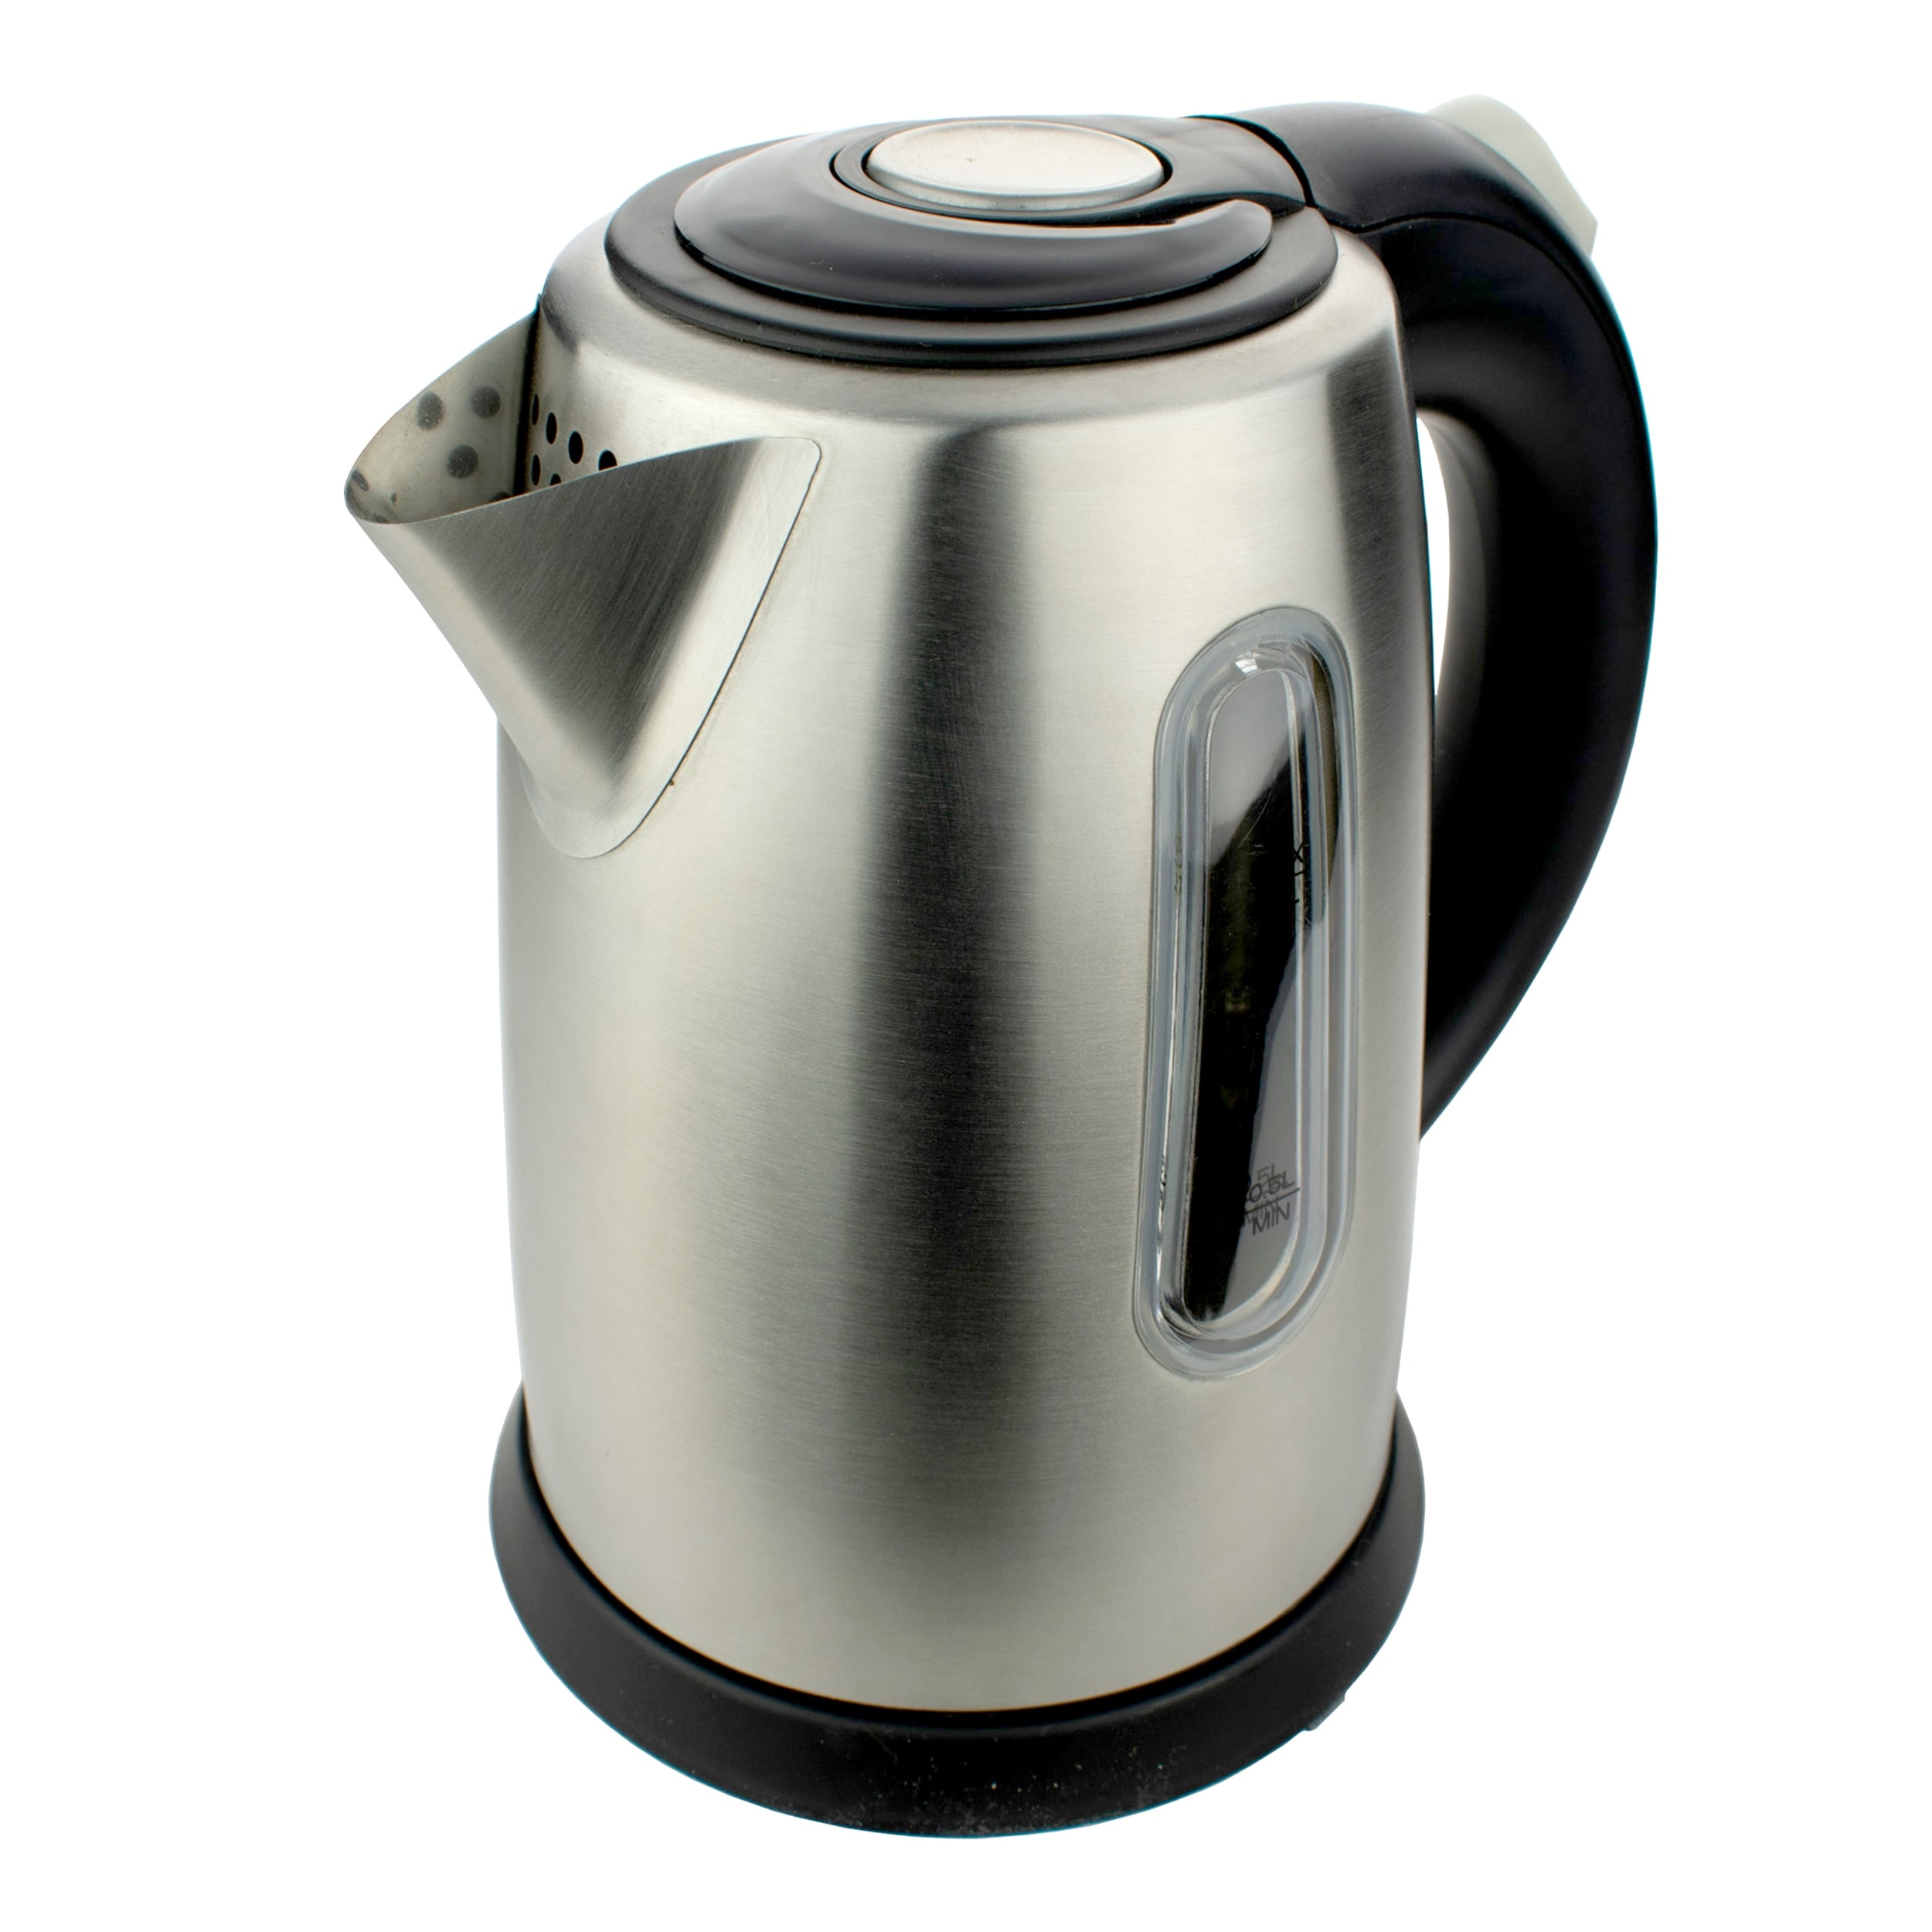 BRENTWOOD KT-1770 1.2-Liter Stainless Steel Electric Cordless Tea Kettle